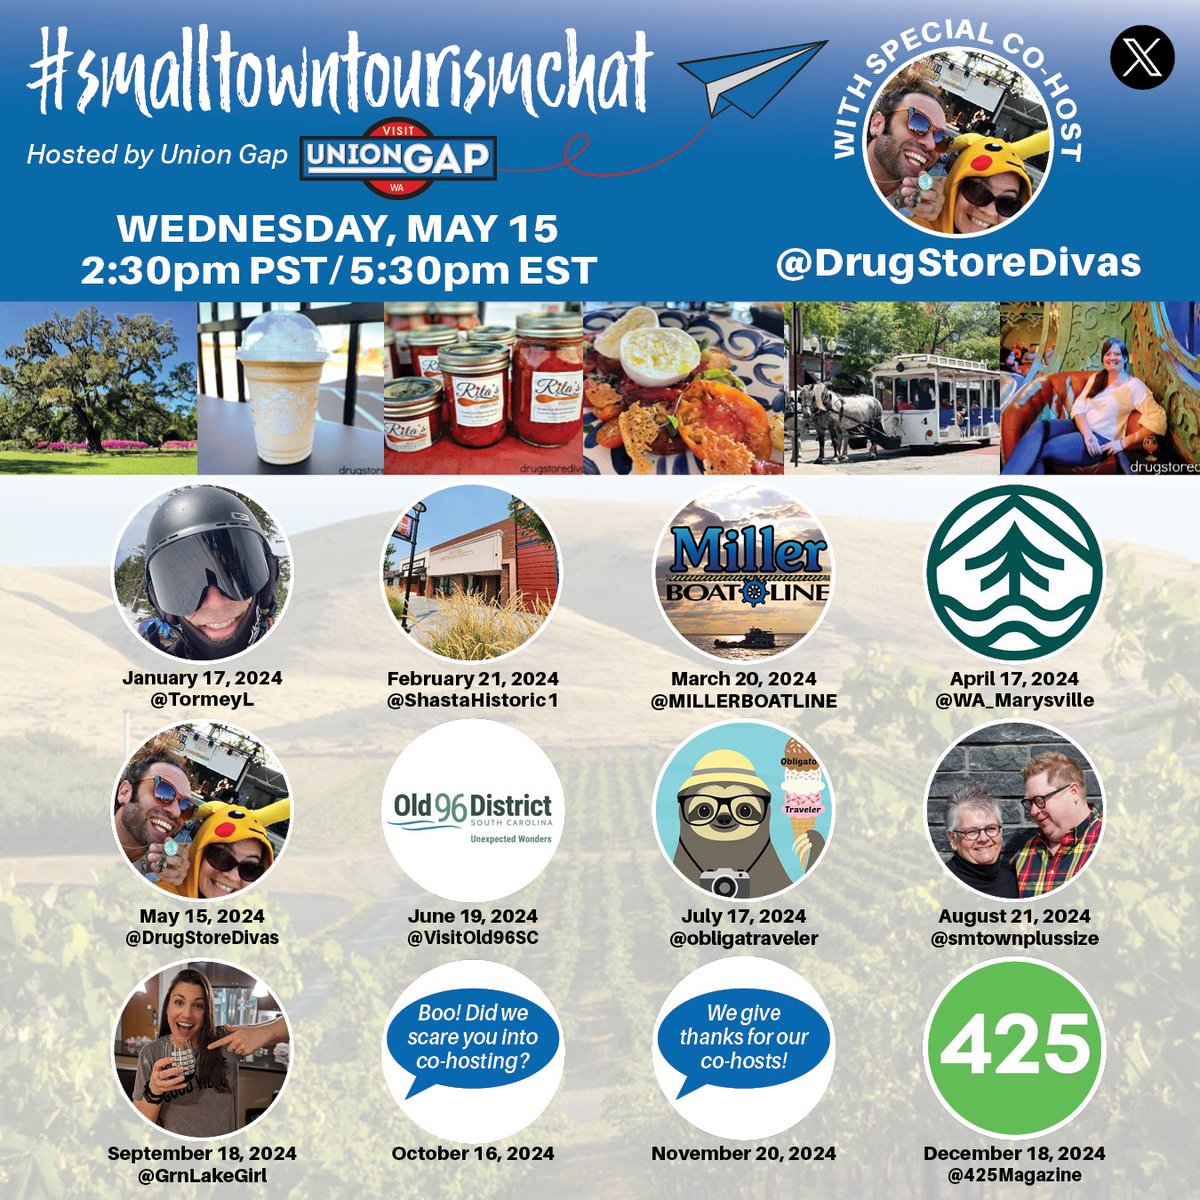 We are a week away from May's #SmallTownTourismChat with the one and only @drugstoredivas - or most featured cohost - and she's even toured Union Gap as well! We love this relationship! Save May 15th on your calendar.